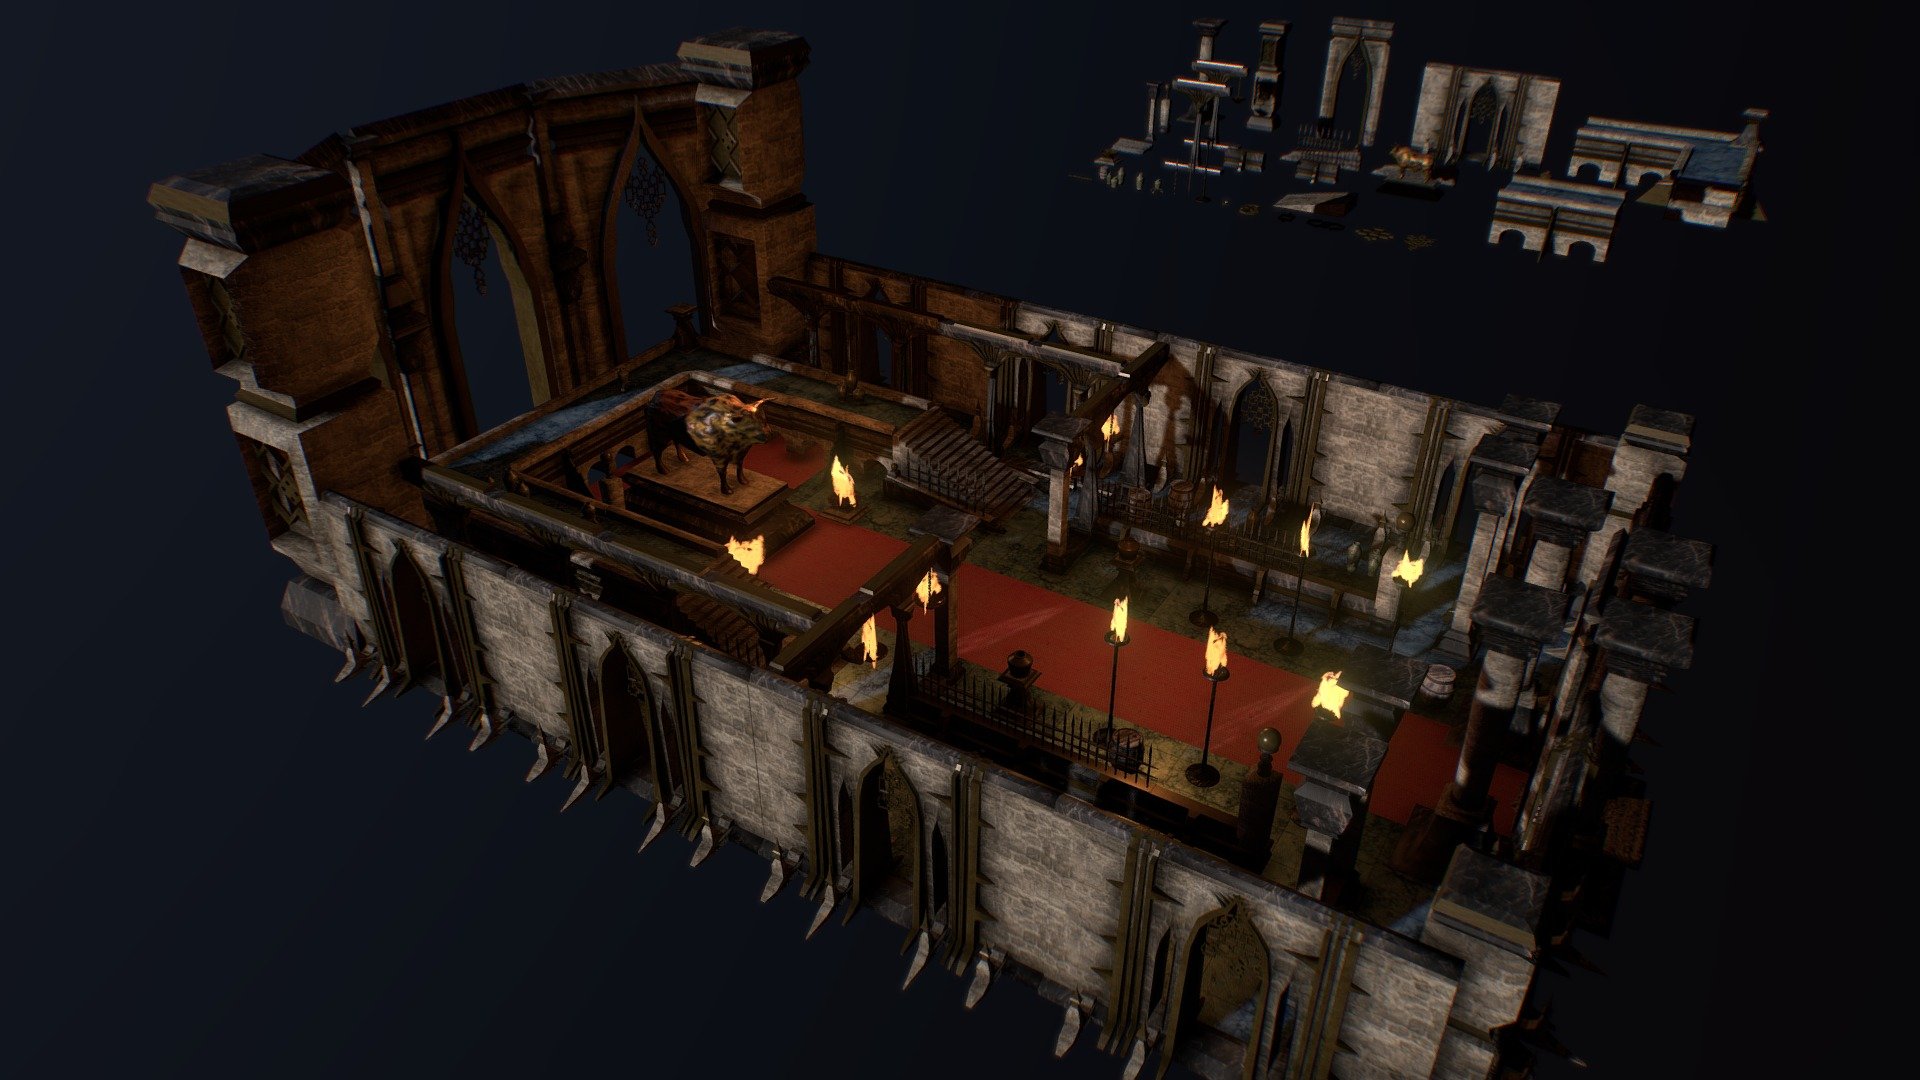 Dungeon kitbash set for artwork, game creation and for environment project

This Purchase includes:




6 baked textured small assets for decoration ( barrel, plates, iron rods and vases )

27 architecture parts whit 4 tileable material channel , stone, marble, gold and floor 

All the assets parts are lowpoly and game ready, tested out in Unreal Engine 4

https://www.youtube.com/watch?v=6JToLS5eC7k&amp;t=26s

Attention! The fire and water is not included, the video only shows the recommended material types.

The model is  optimized for real-time engines and for cg rendering! - Taur Dungeon Kitbash Set - Buy Royalty Free 3D model by Vanitas Unhuman (@benmonor) 3d model